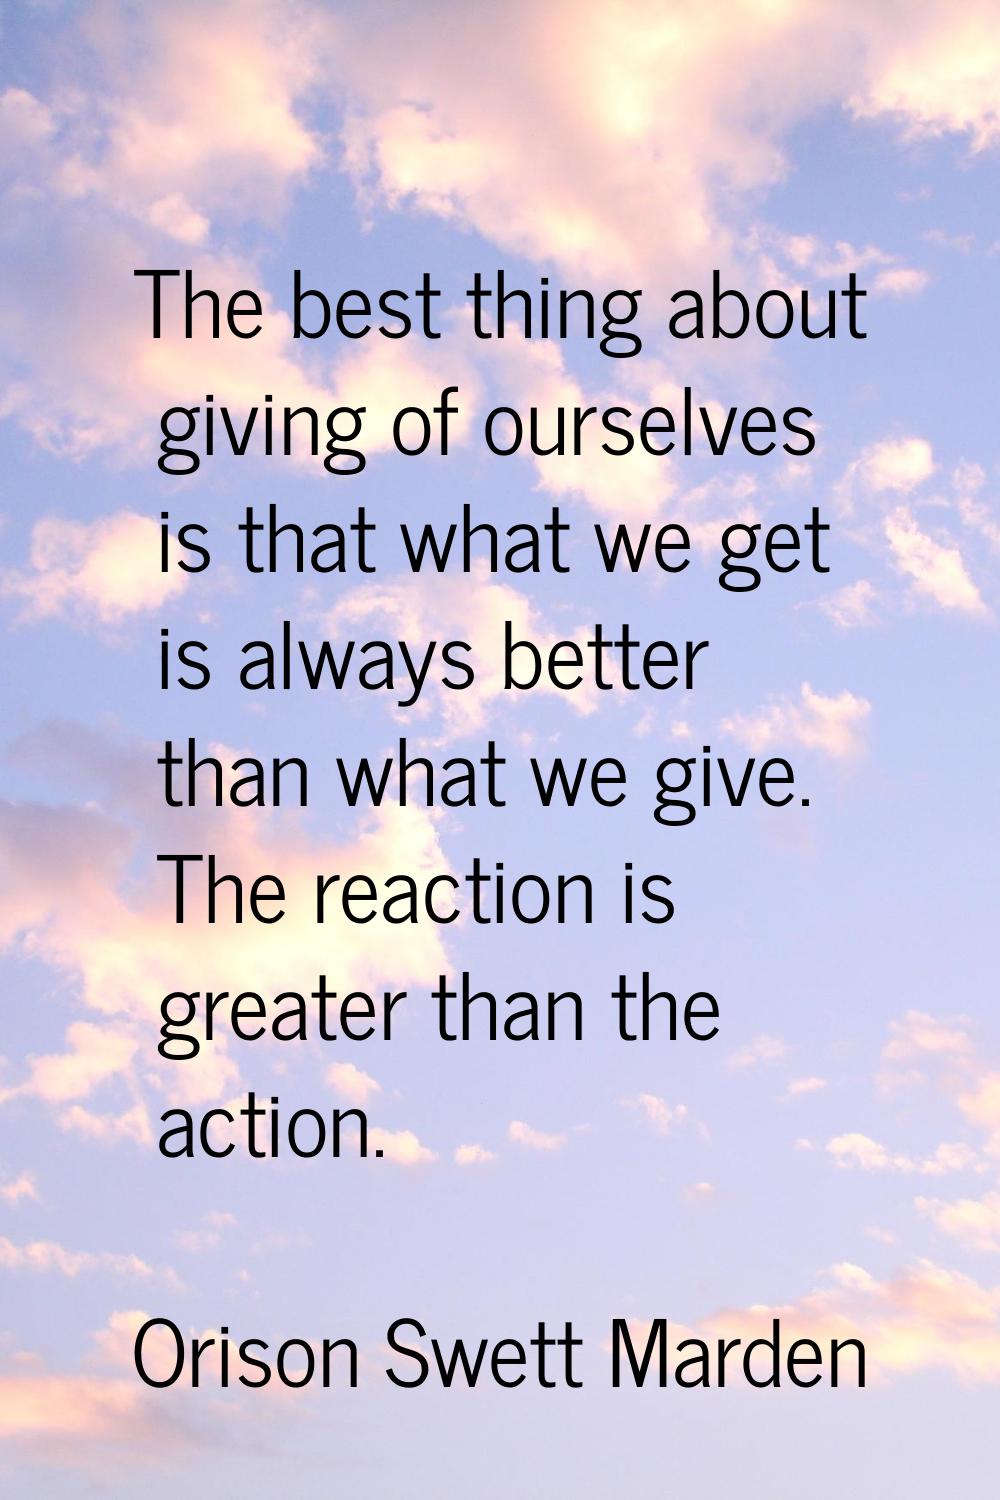 The best thing about giving of ourselves is that what we get is always better than what we give. Th